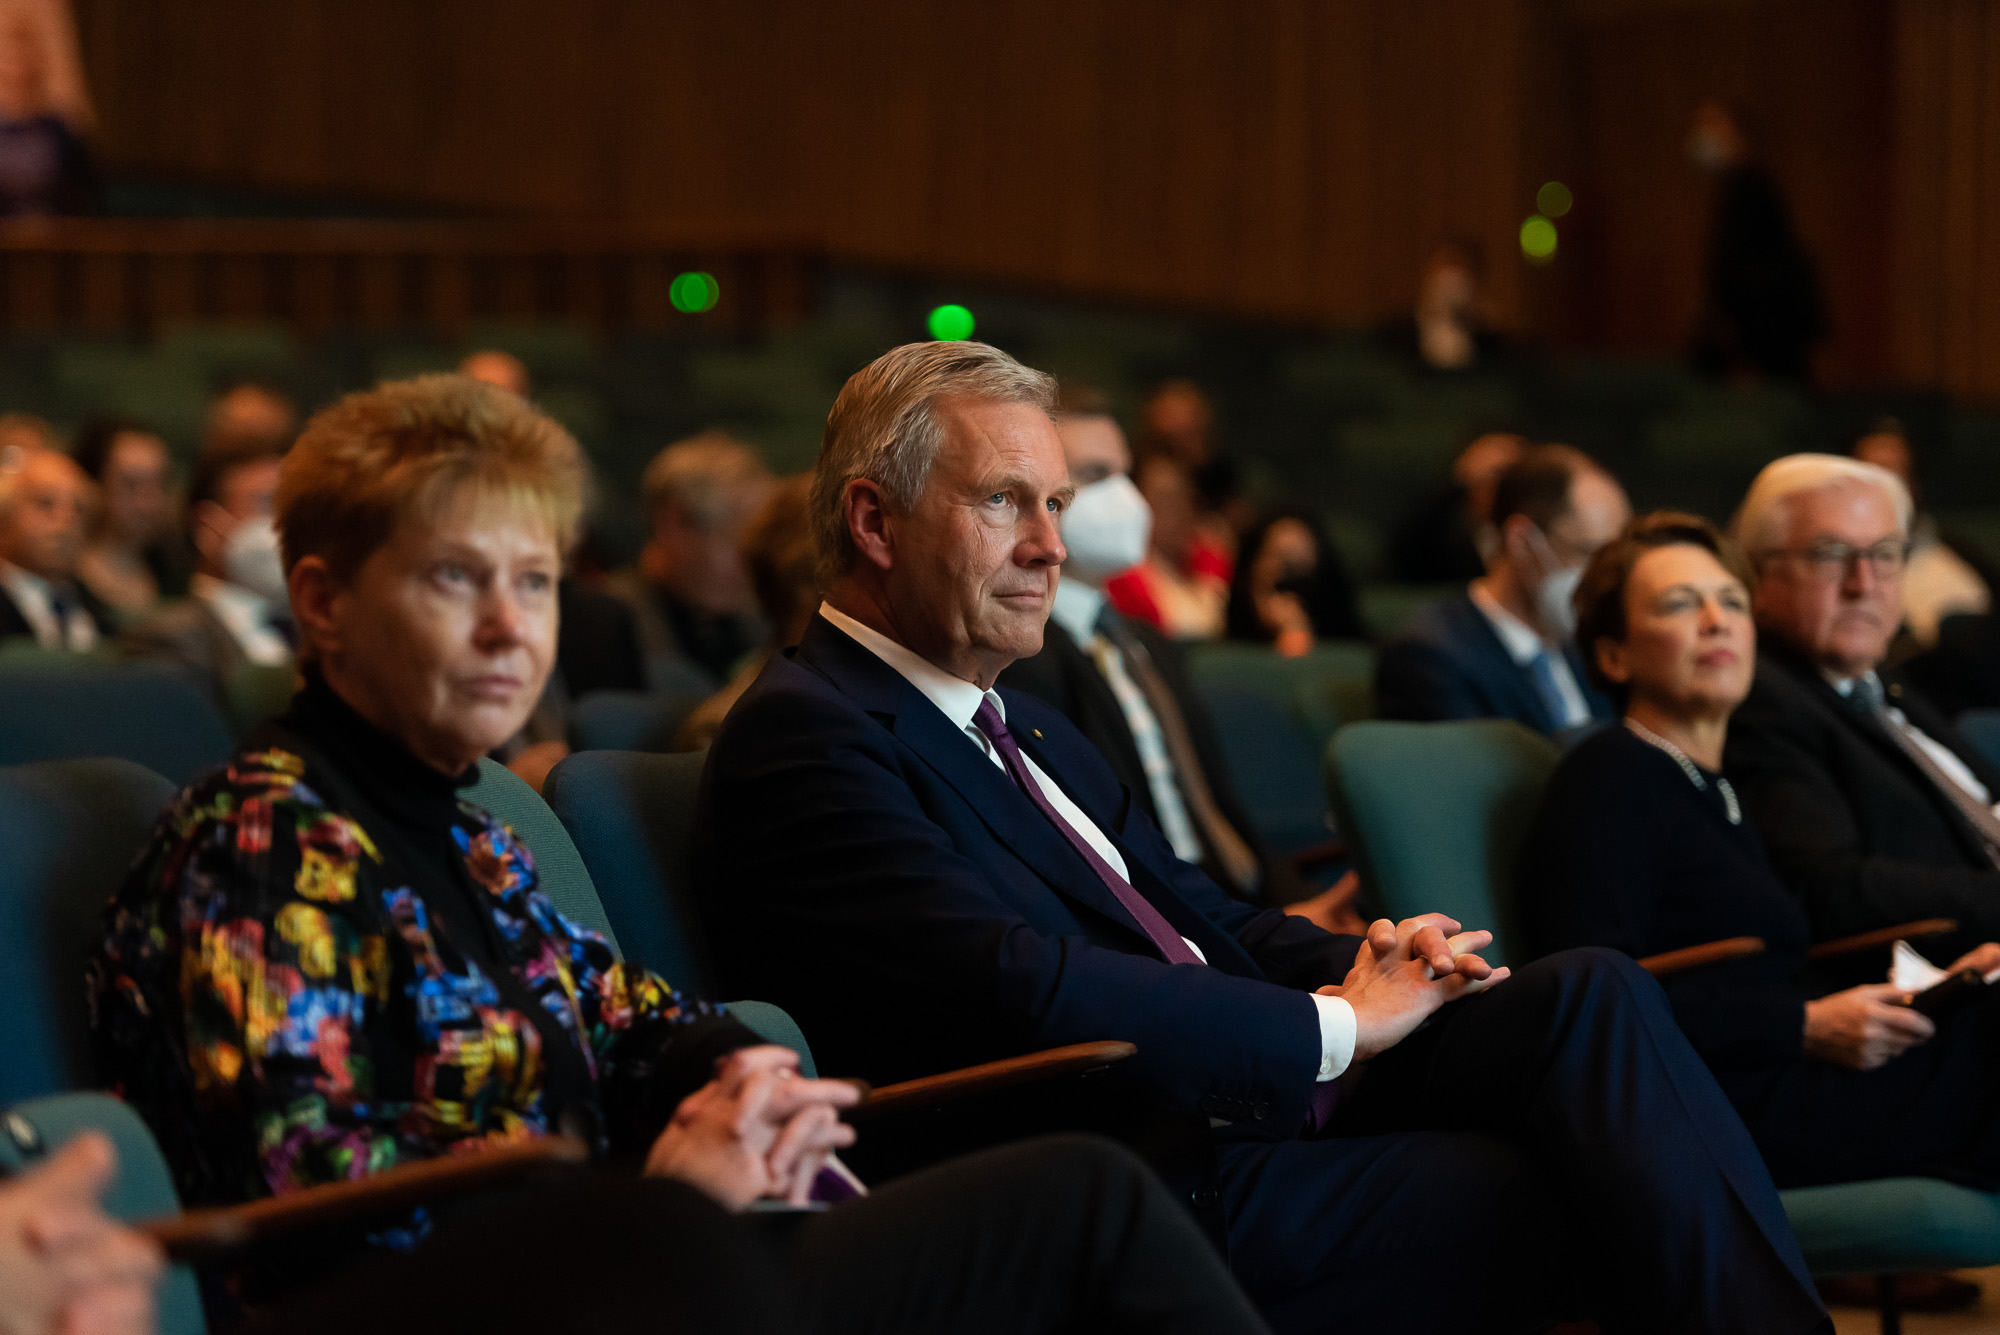 The Vice President of the German Bundestag, Petra Pau, and former Federal President Christian Wulff were among the guests of honor at the evening. Photo: Andreas Schwarz